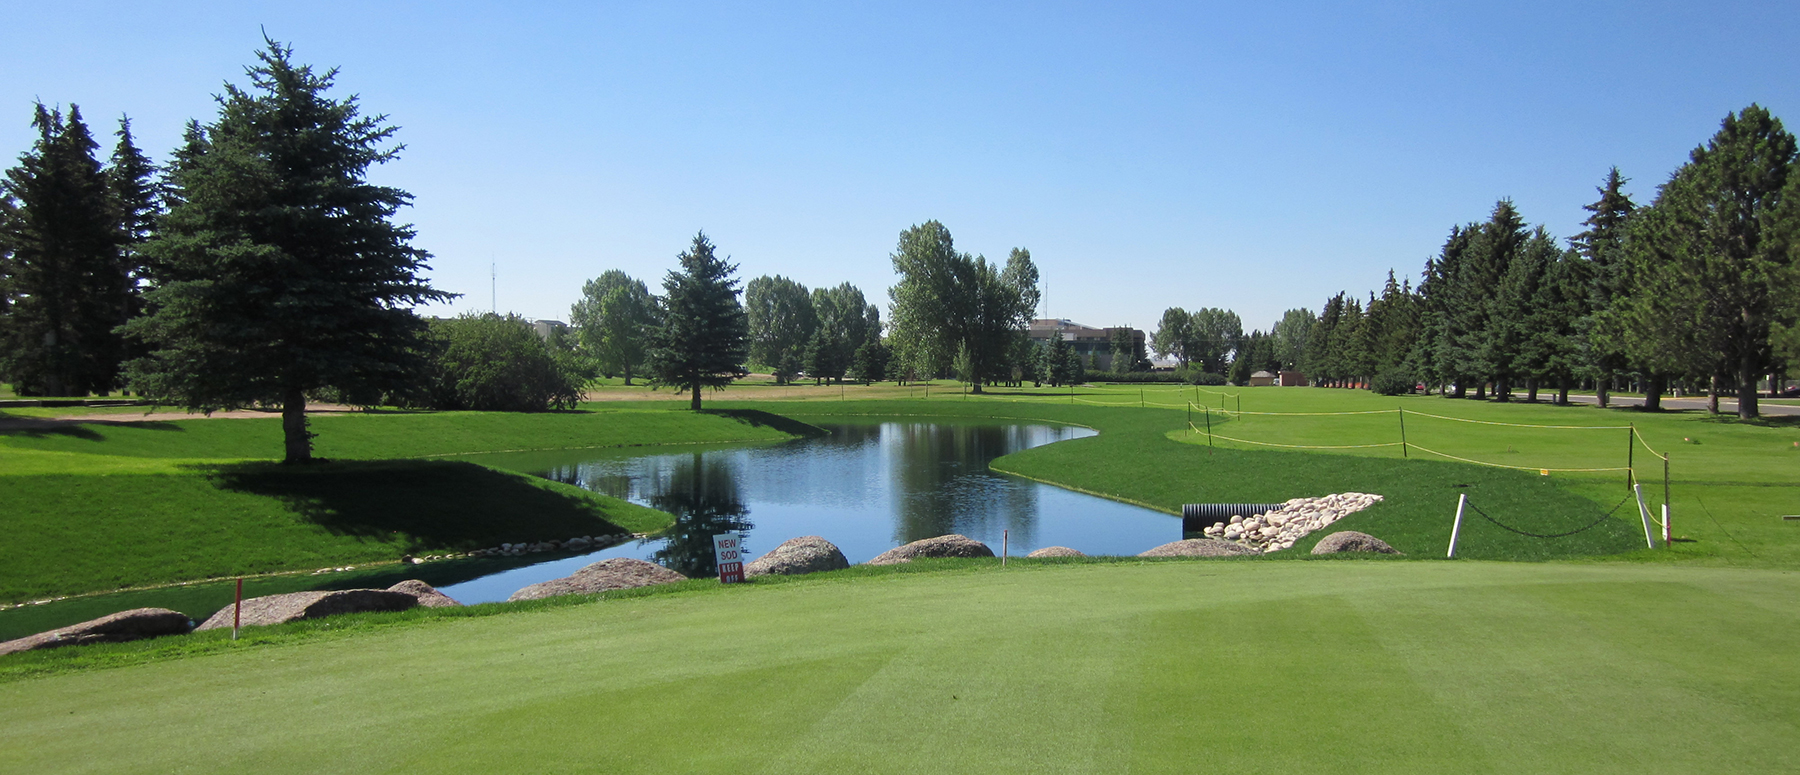 Golf-Course_Stormwater-Control-System_Hero